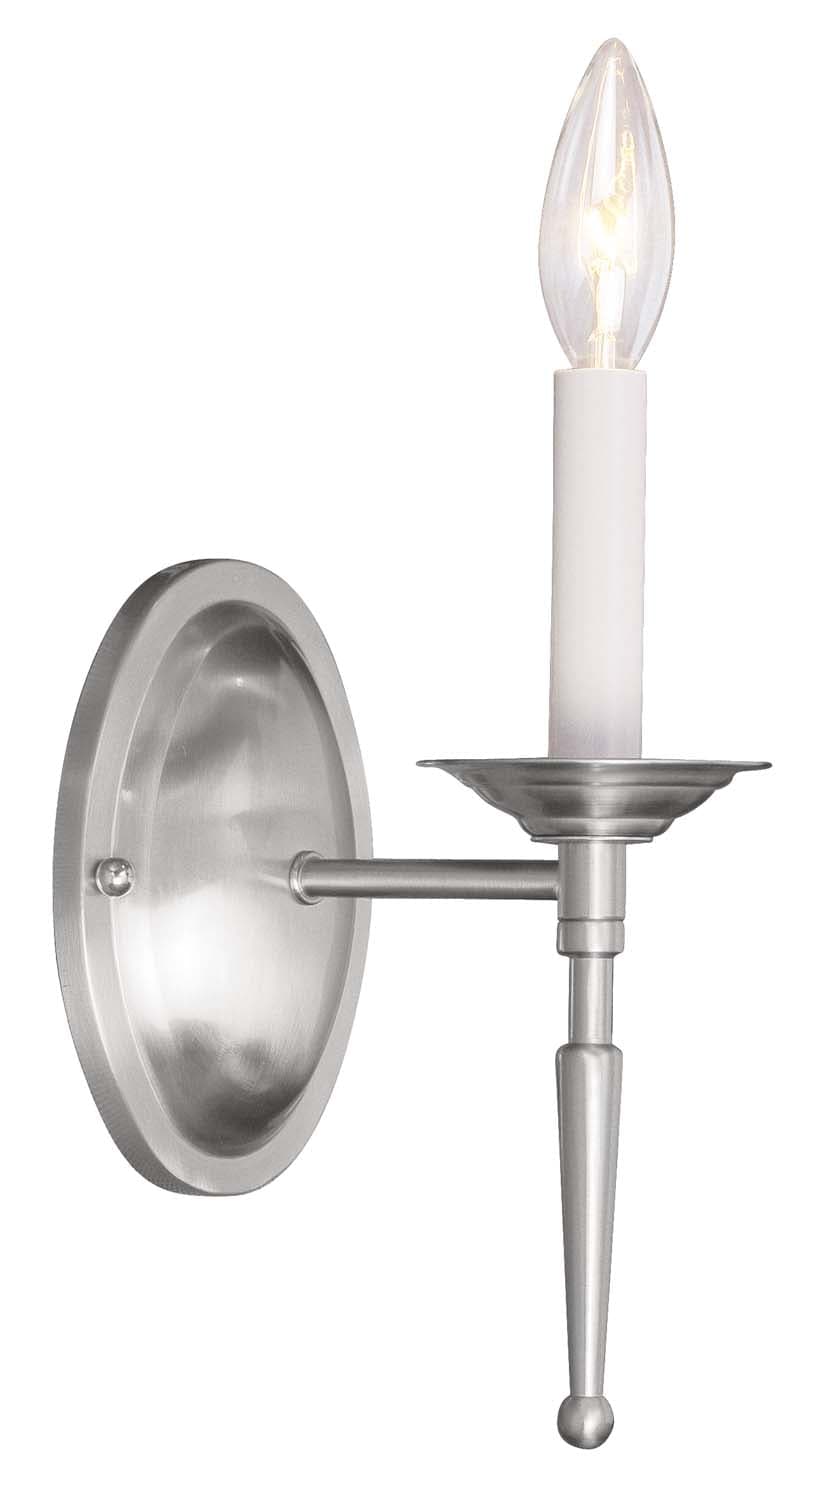 Livex Lighting - 5121-91 - One Light Wall Sconce - Williamsburgh - Brushed Nickel